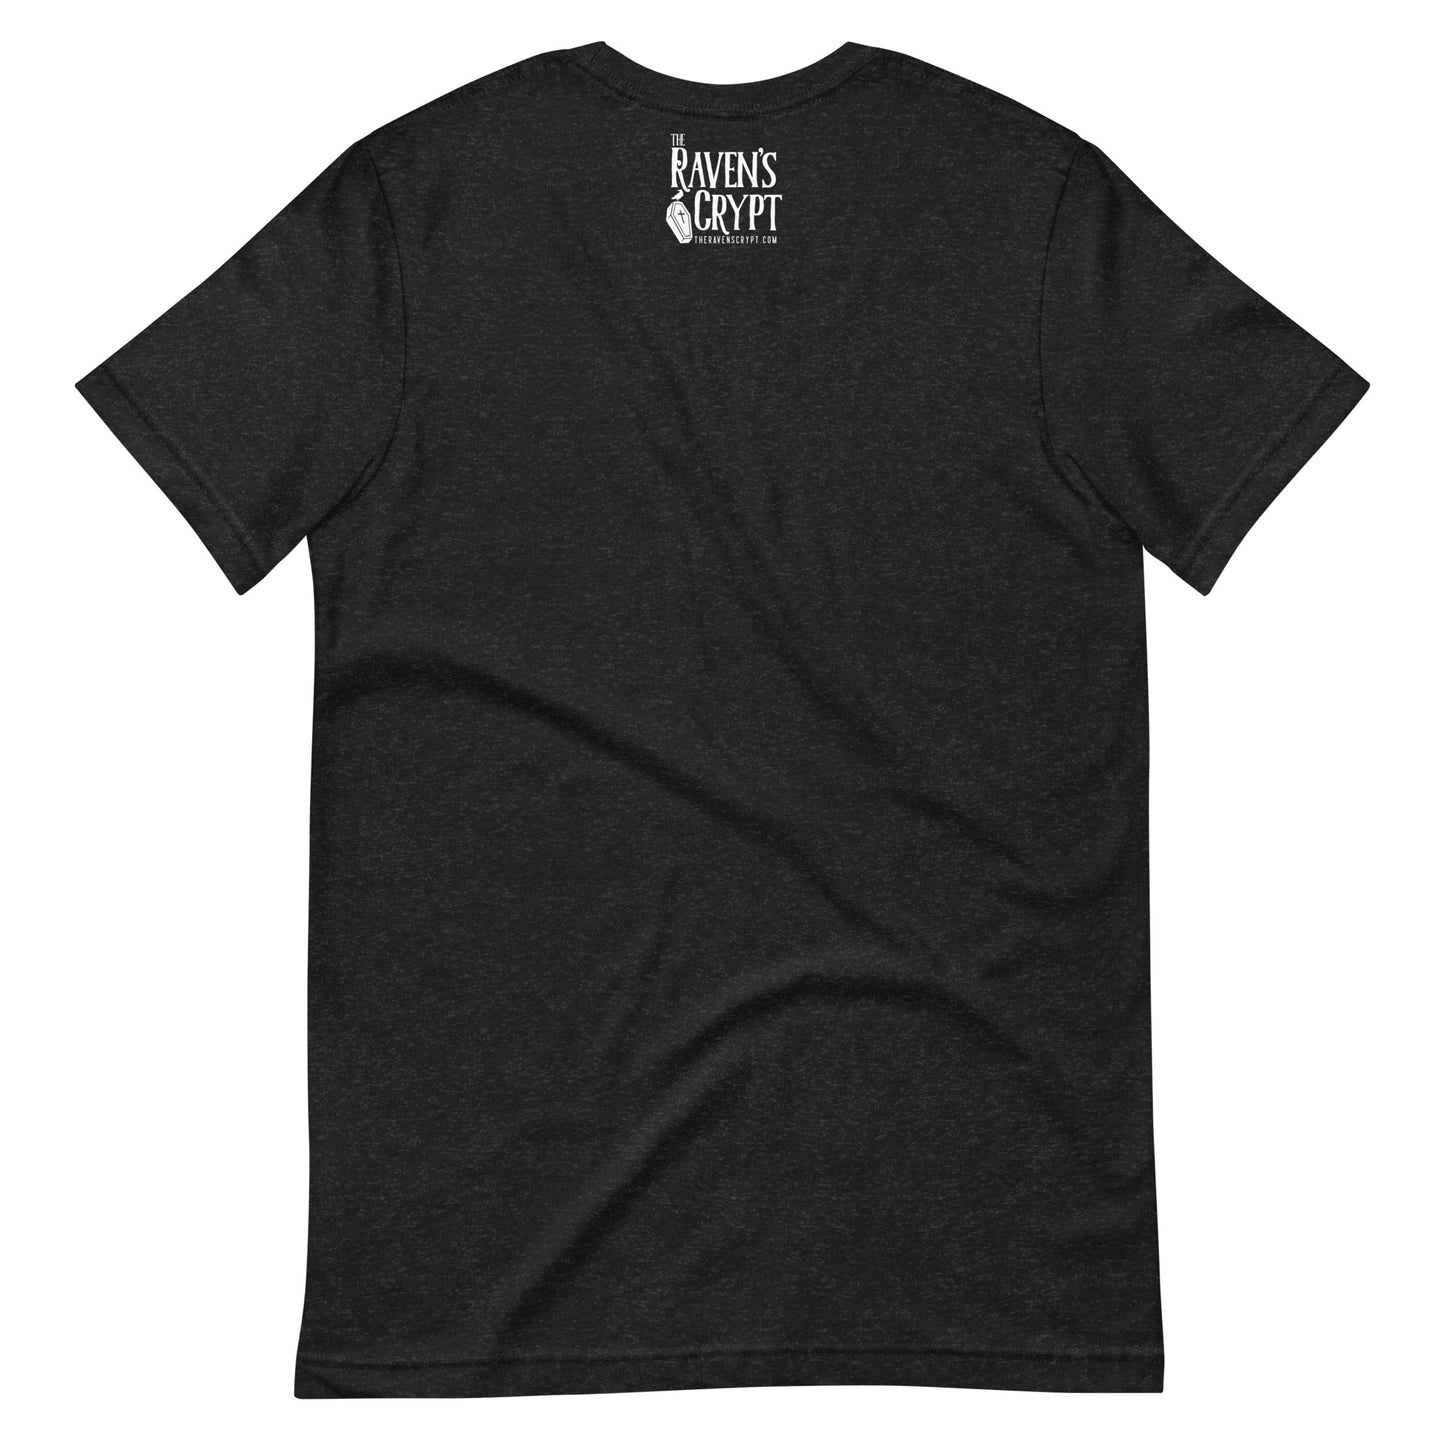 The Night Has Come - Men's t-shirt - Black Heather Back